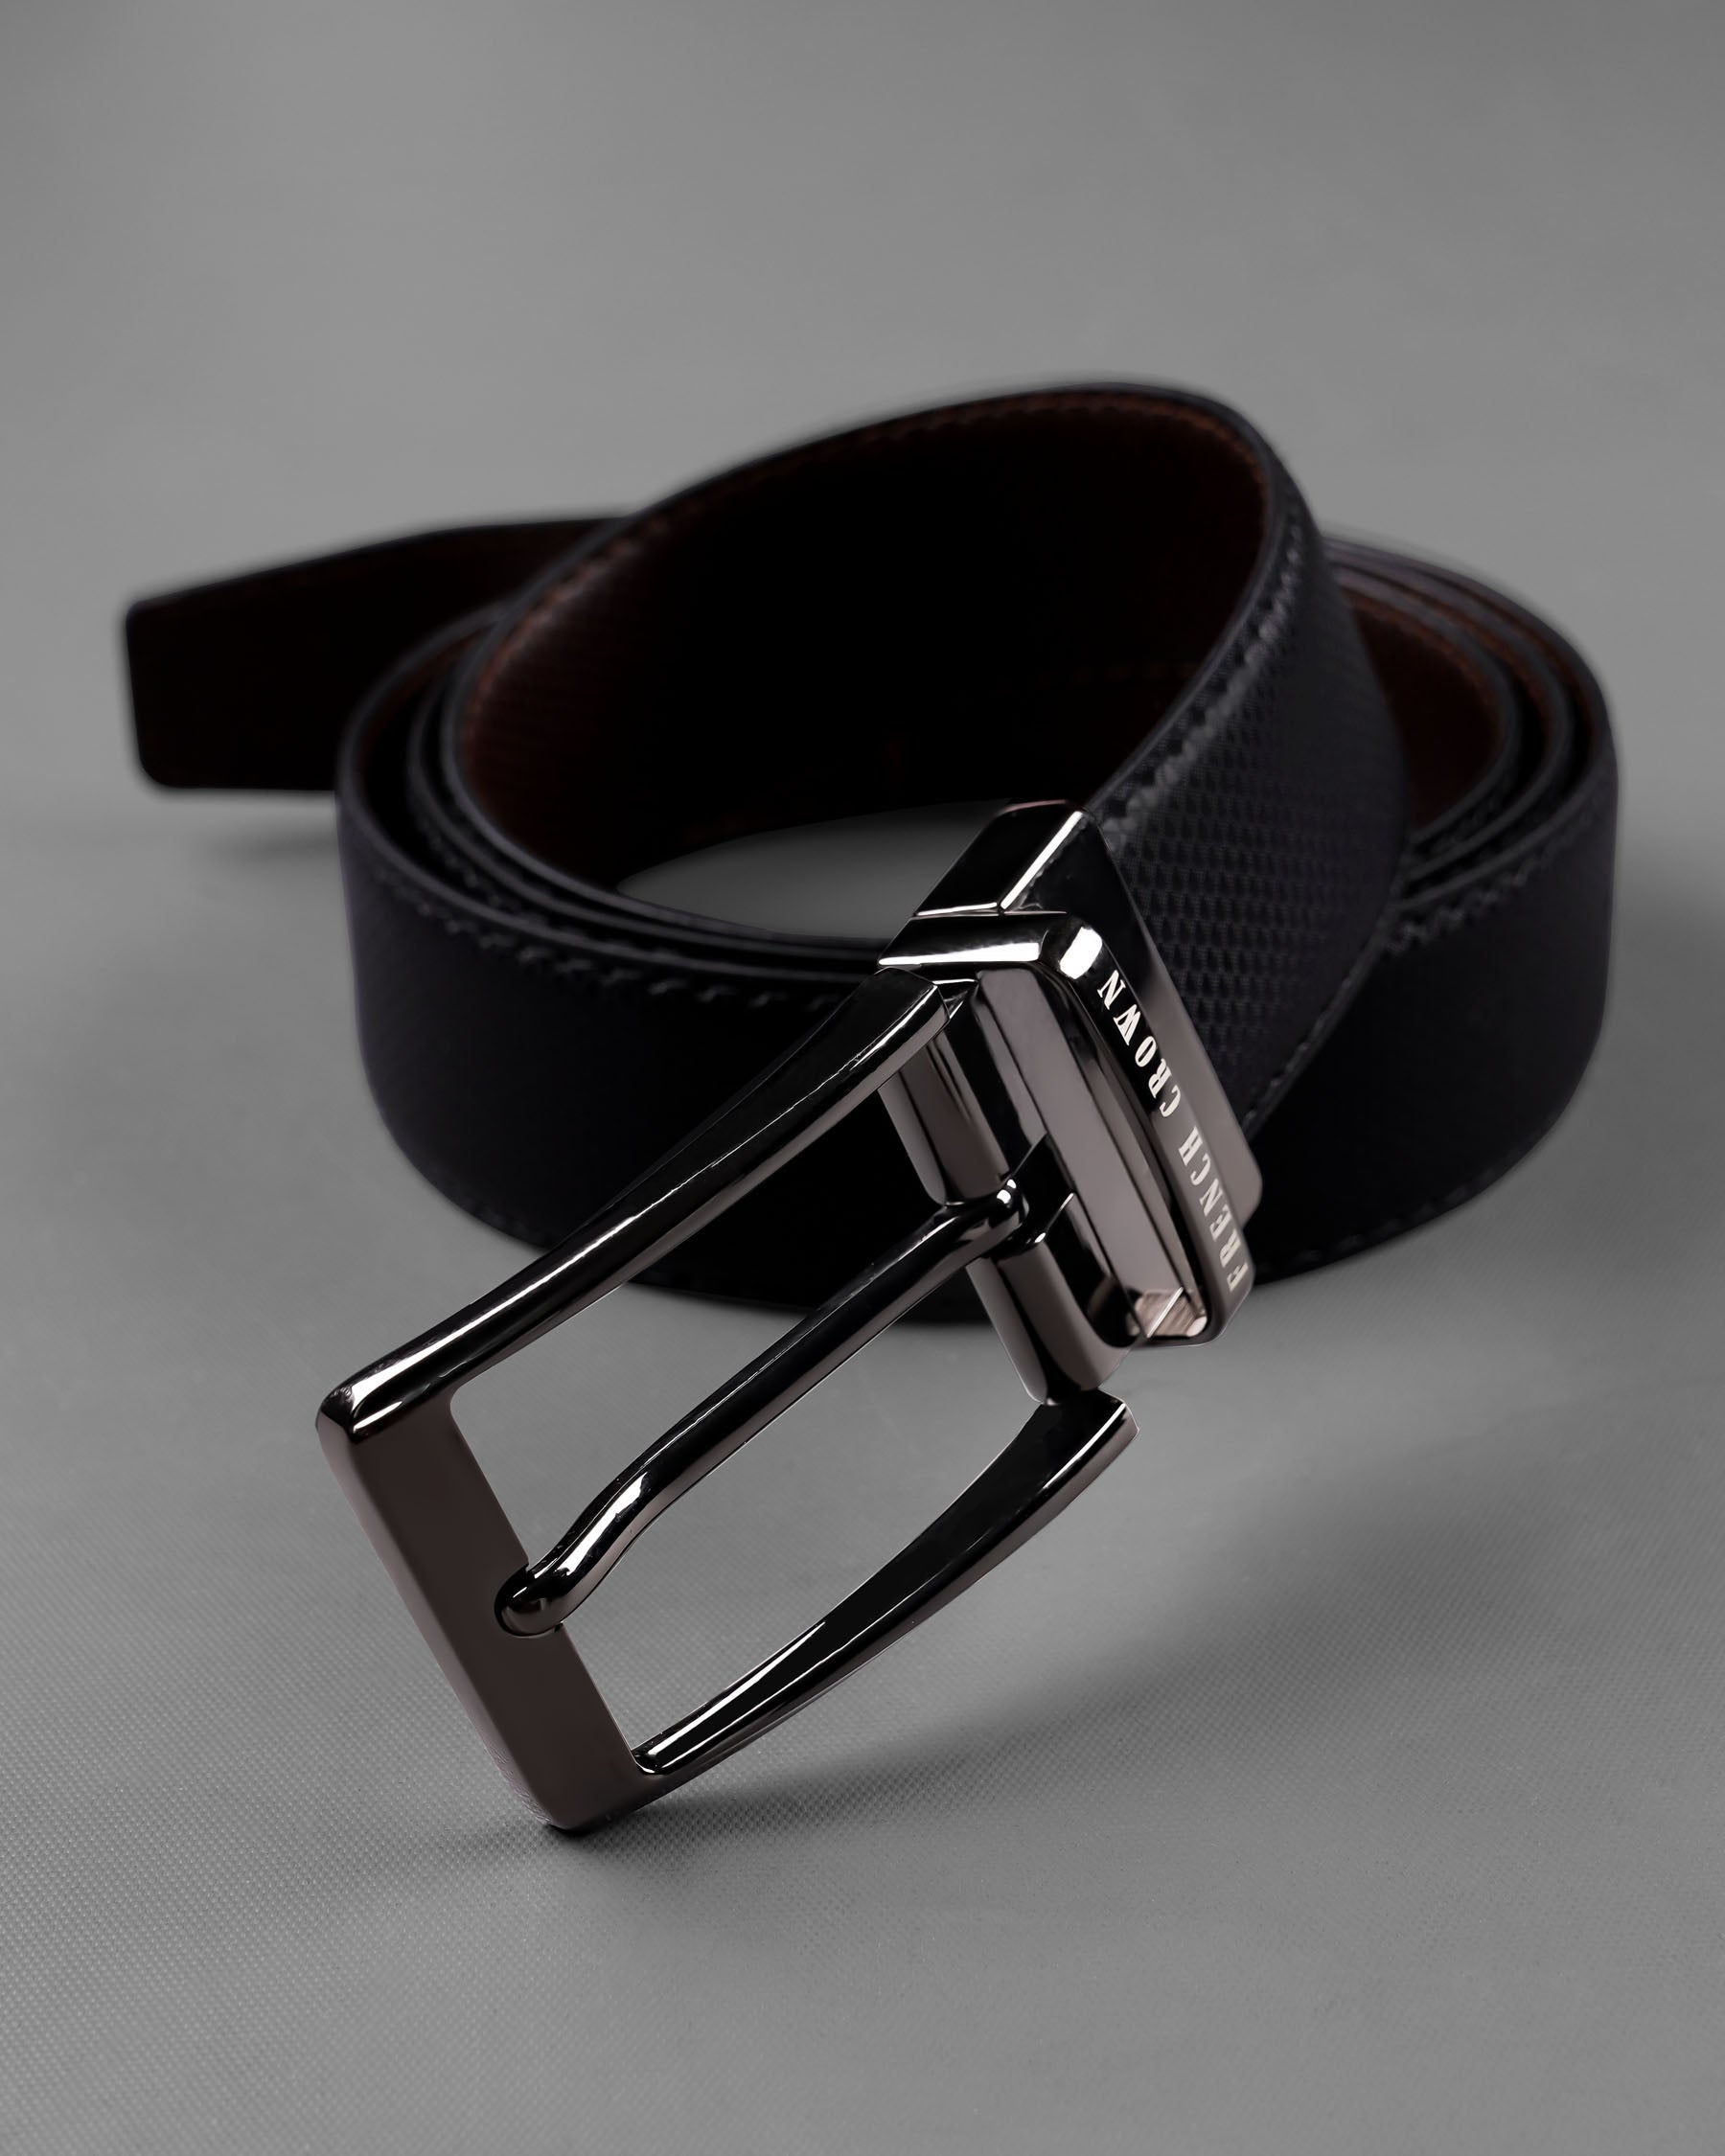 Metallic Black and Silver Buckle with Jade Black and Brown Leather Free Handcrafted Reversible Belt BT083-28, BT083-30, BT083-32, BT083-34, BT083-36, BT083-38